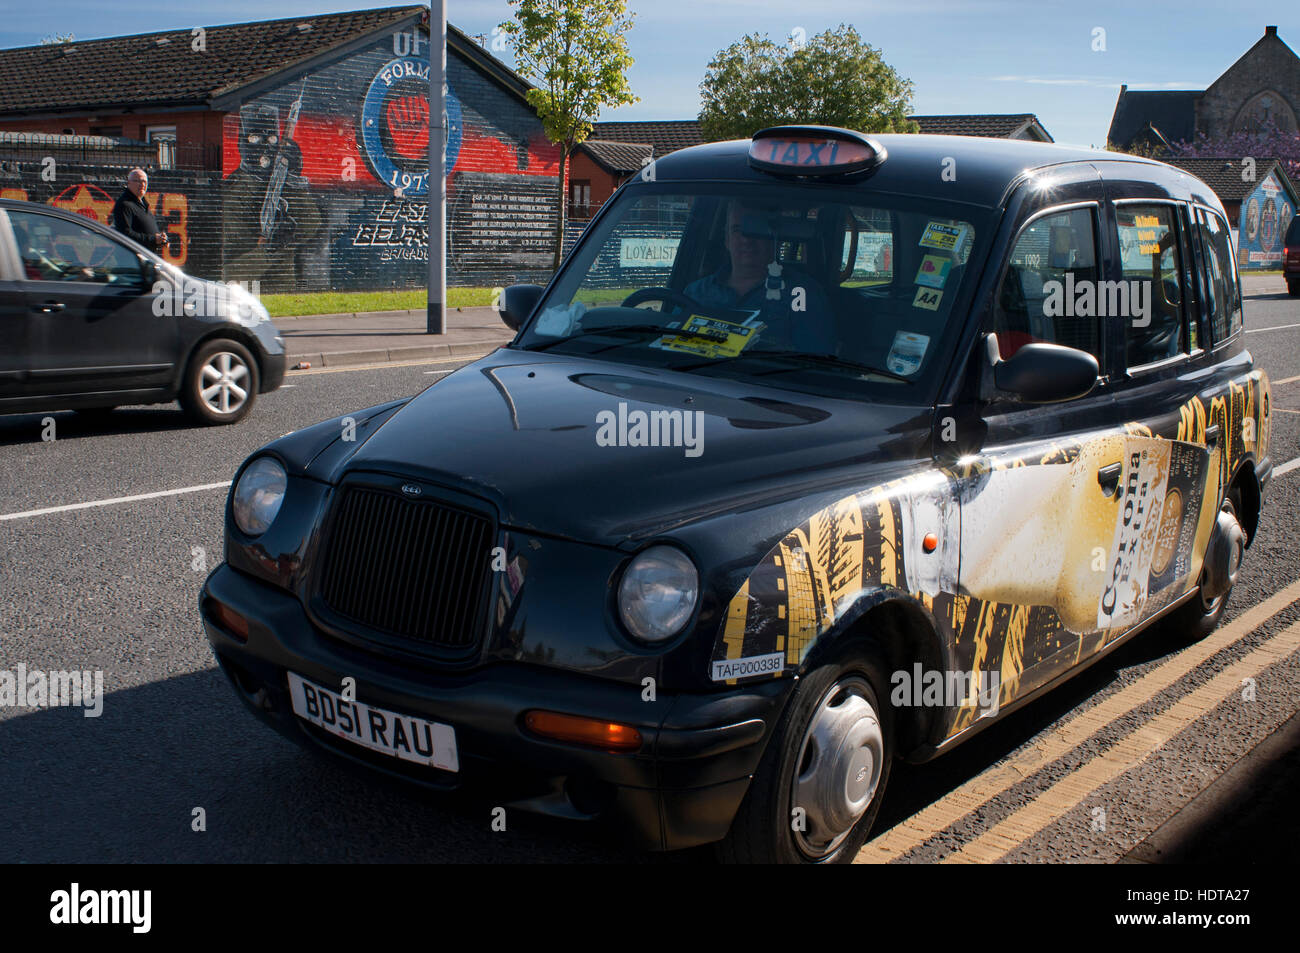 Belfast Black Taxi tours in front of one of the loyalist murals at the bottom of the Newtownards Road in East Belfast, Northern Ireland, UK. U.F.F. Mu Stock Photo